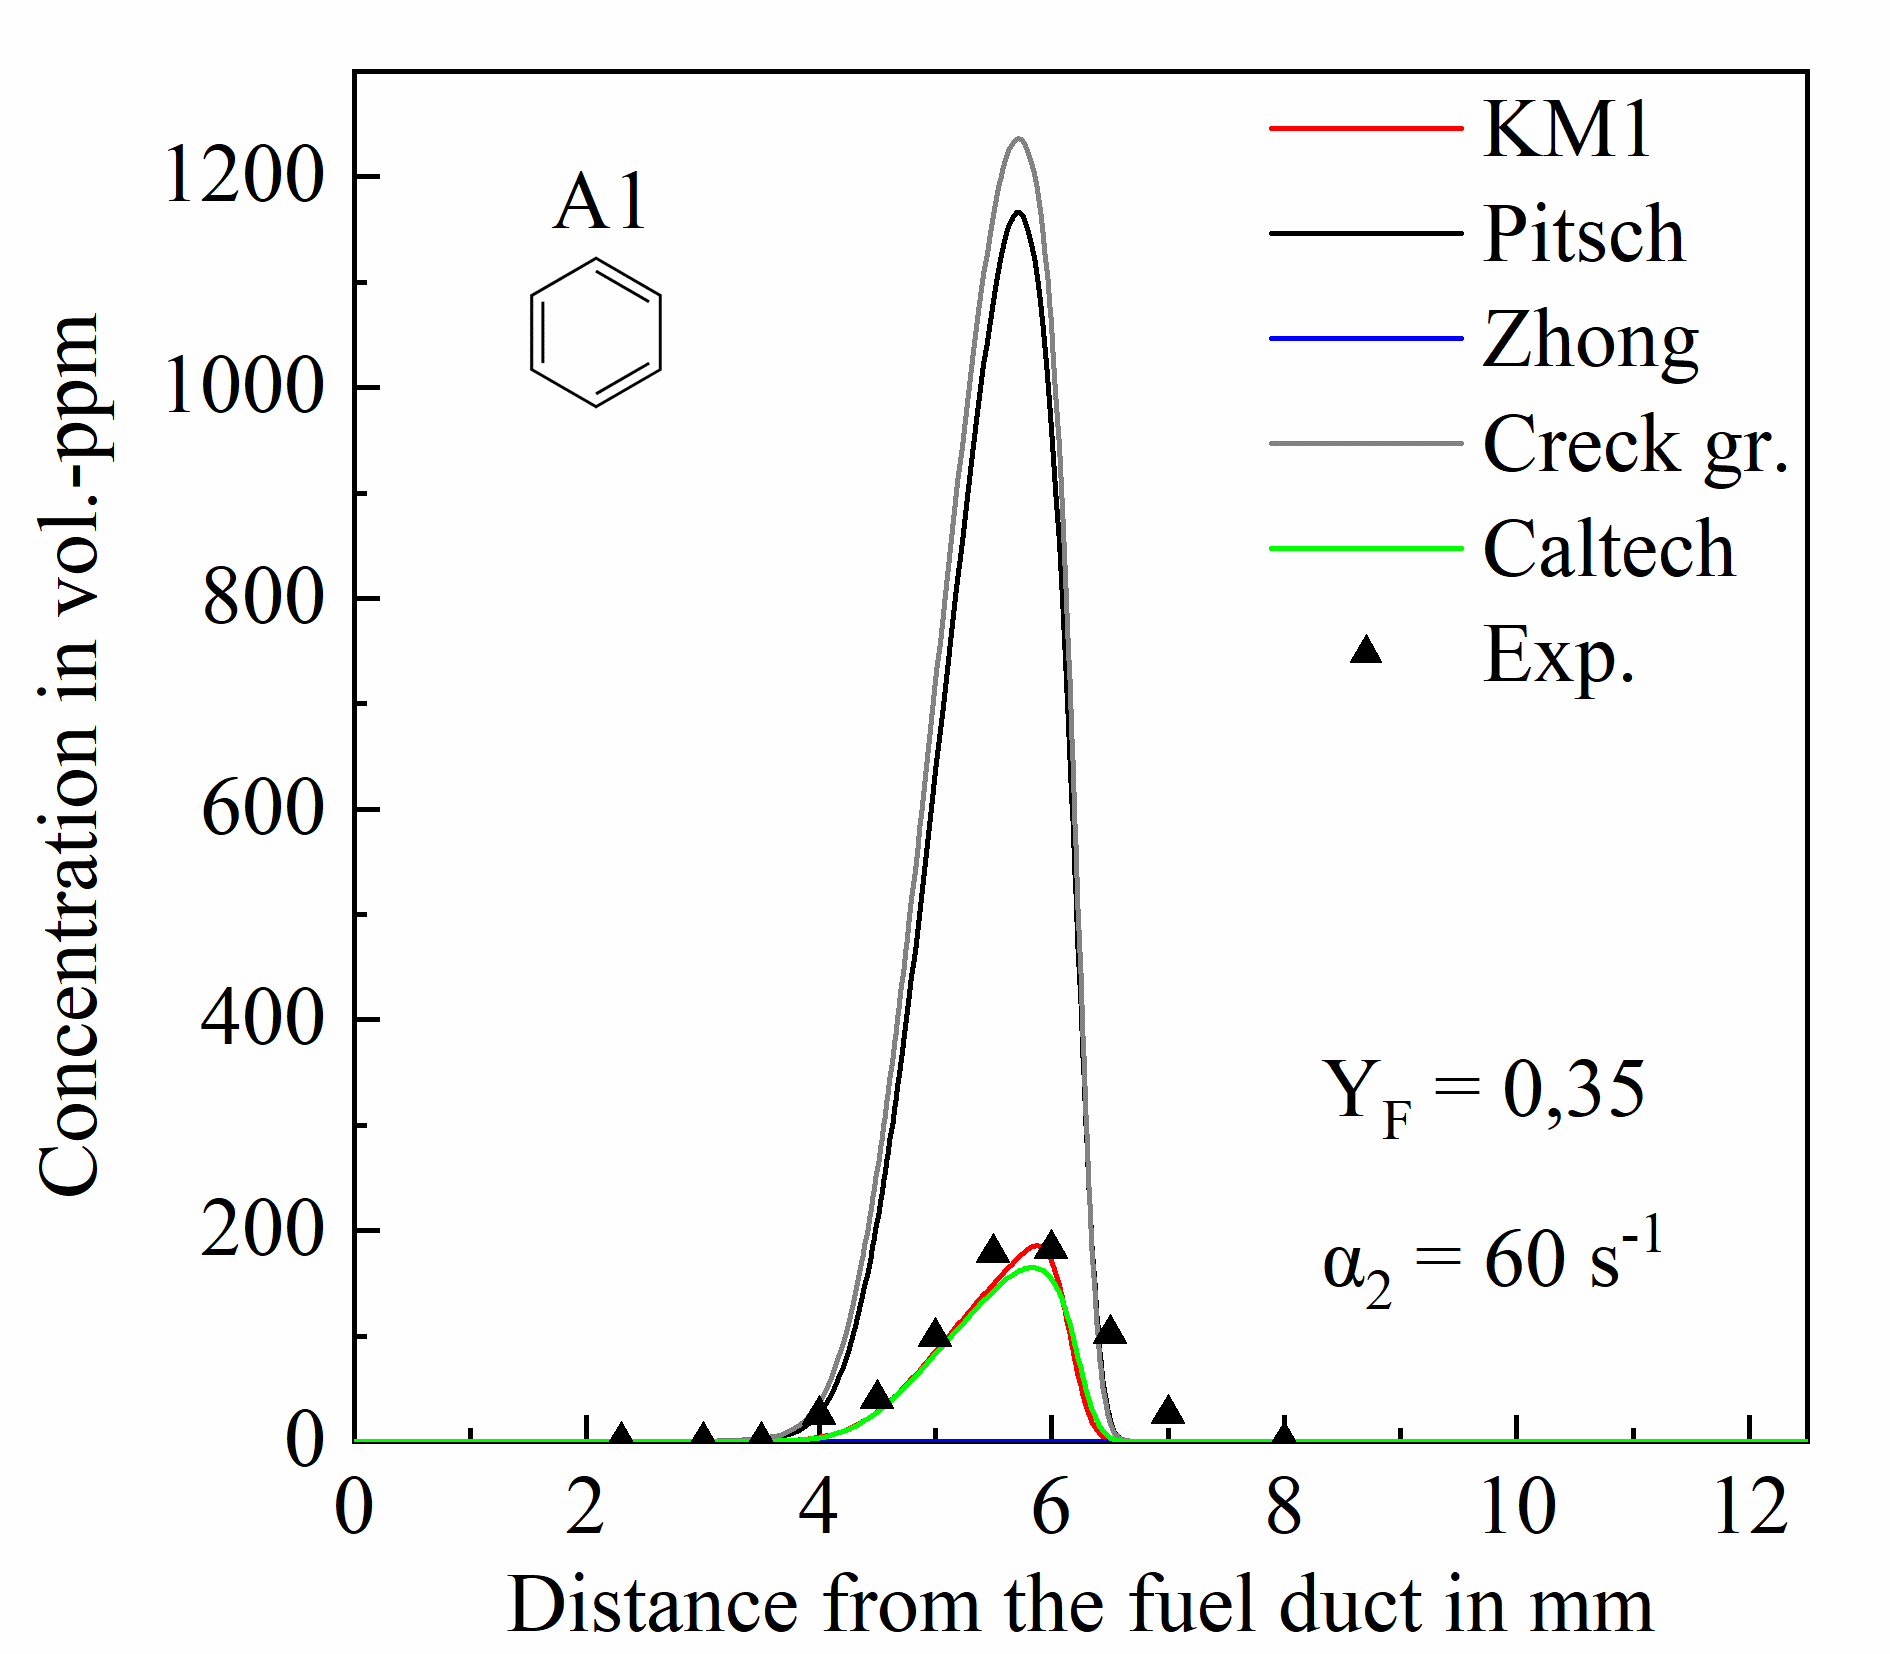 Figure3-measured (symbols) and computed (solid lines) concentration profiles of benzene (A1)